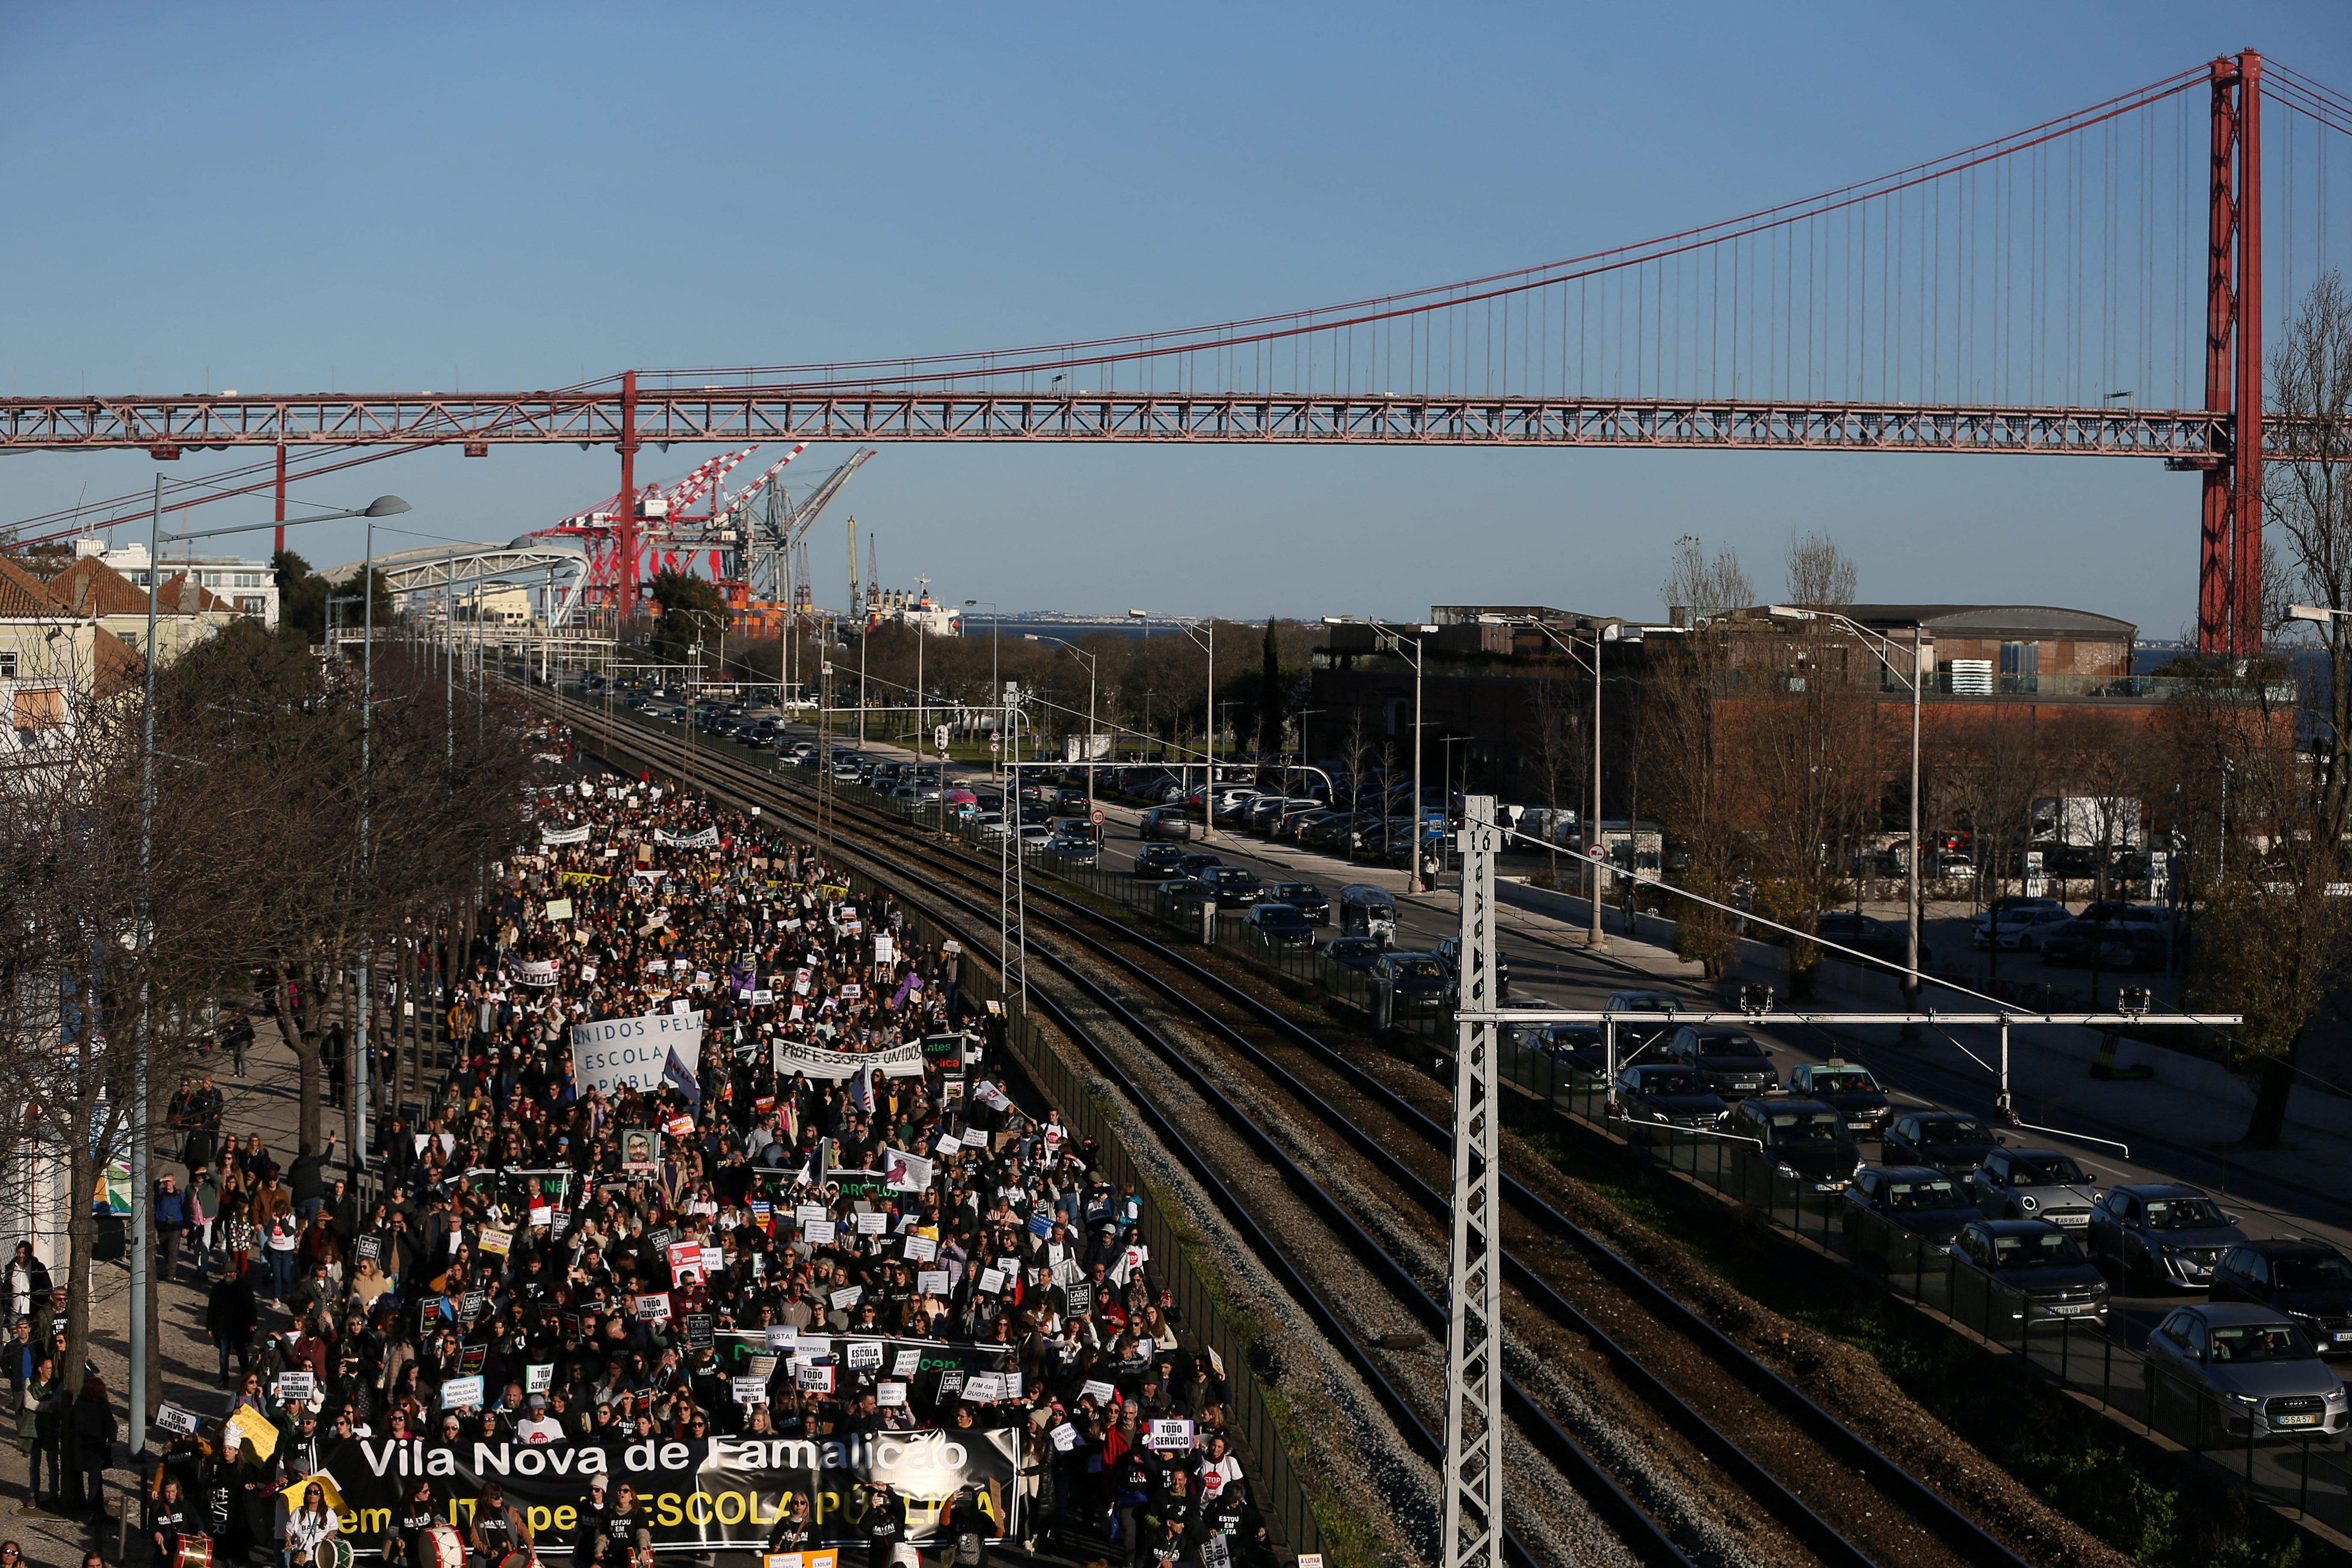 School workers demonstrate for better salaries and working conditions in Lisbon